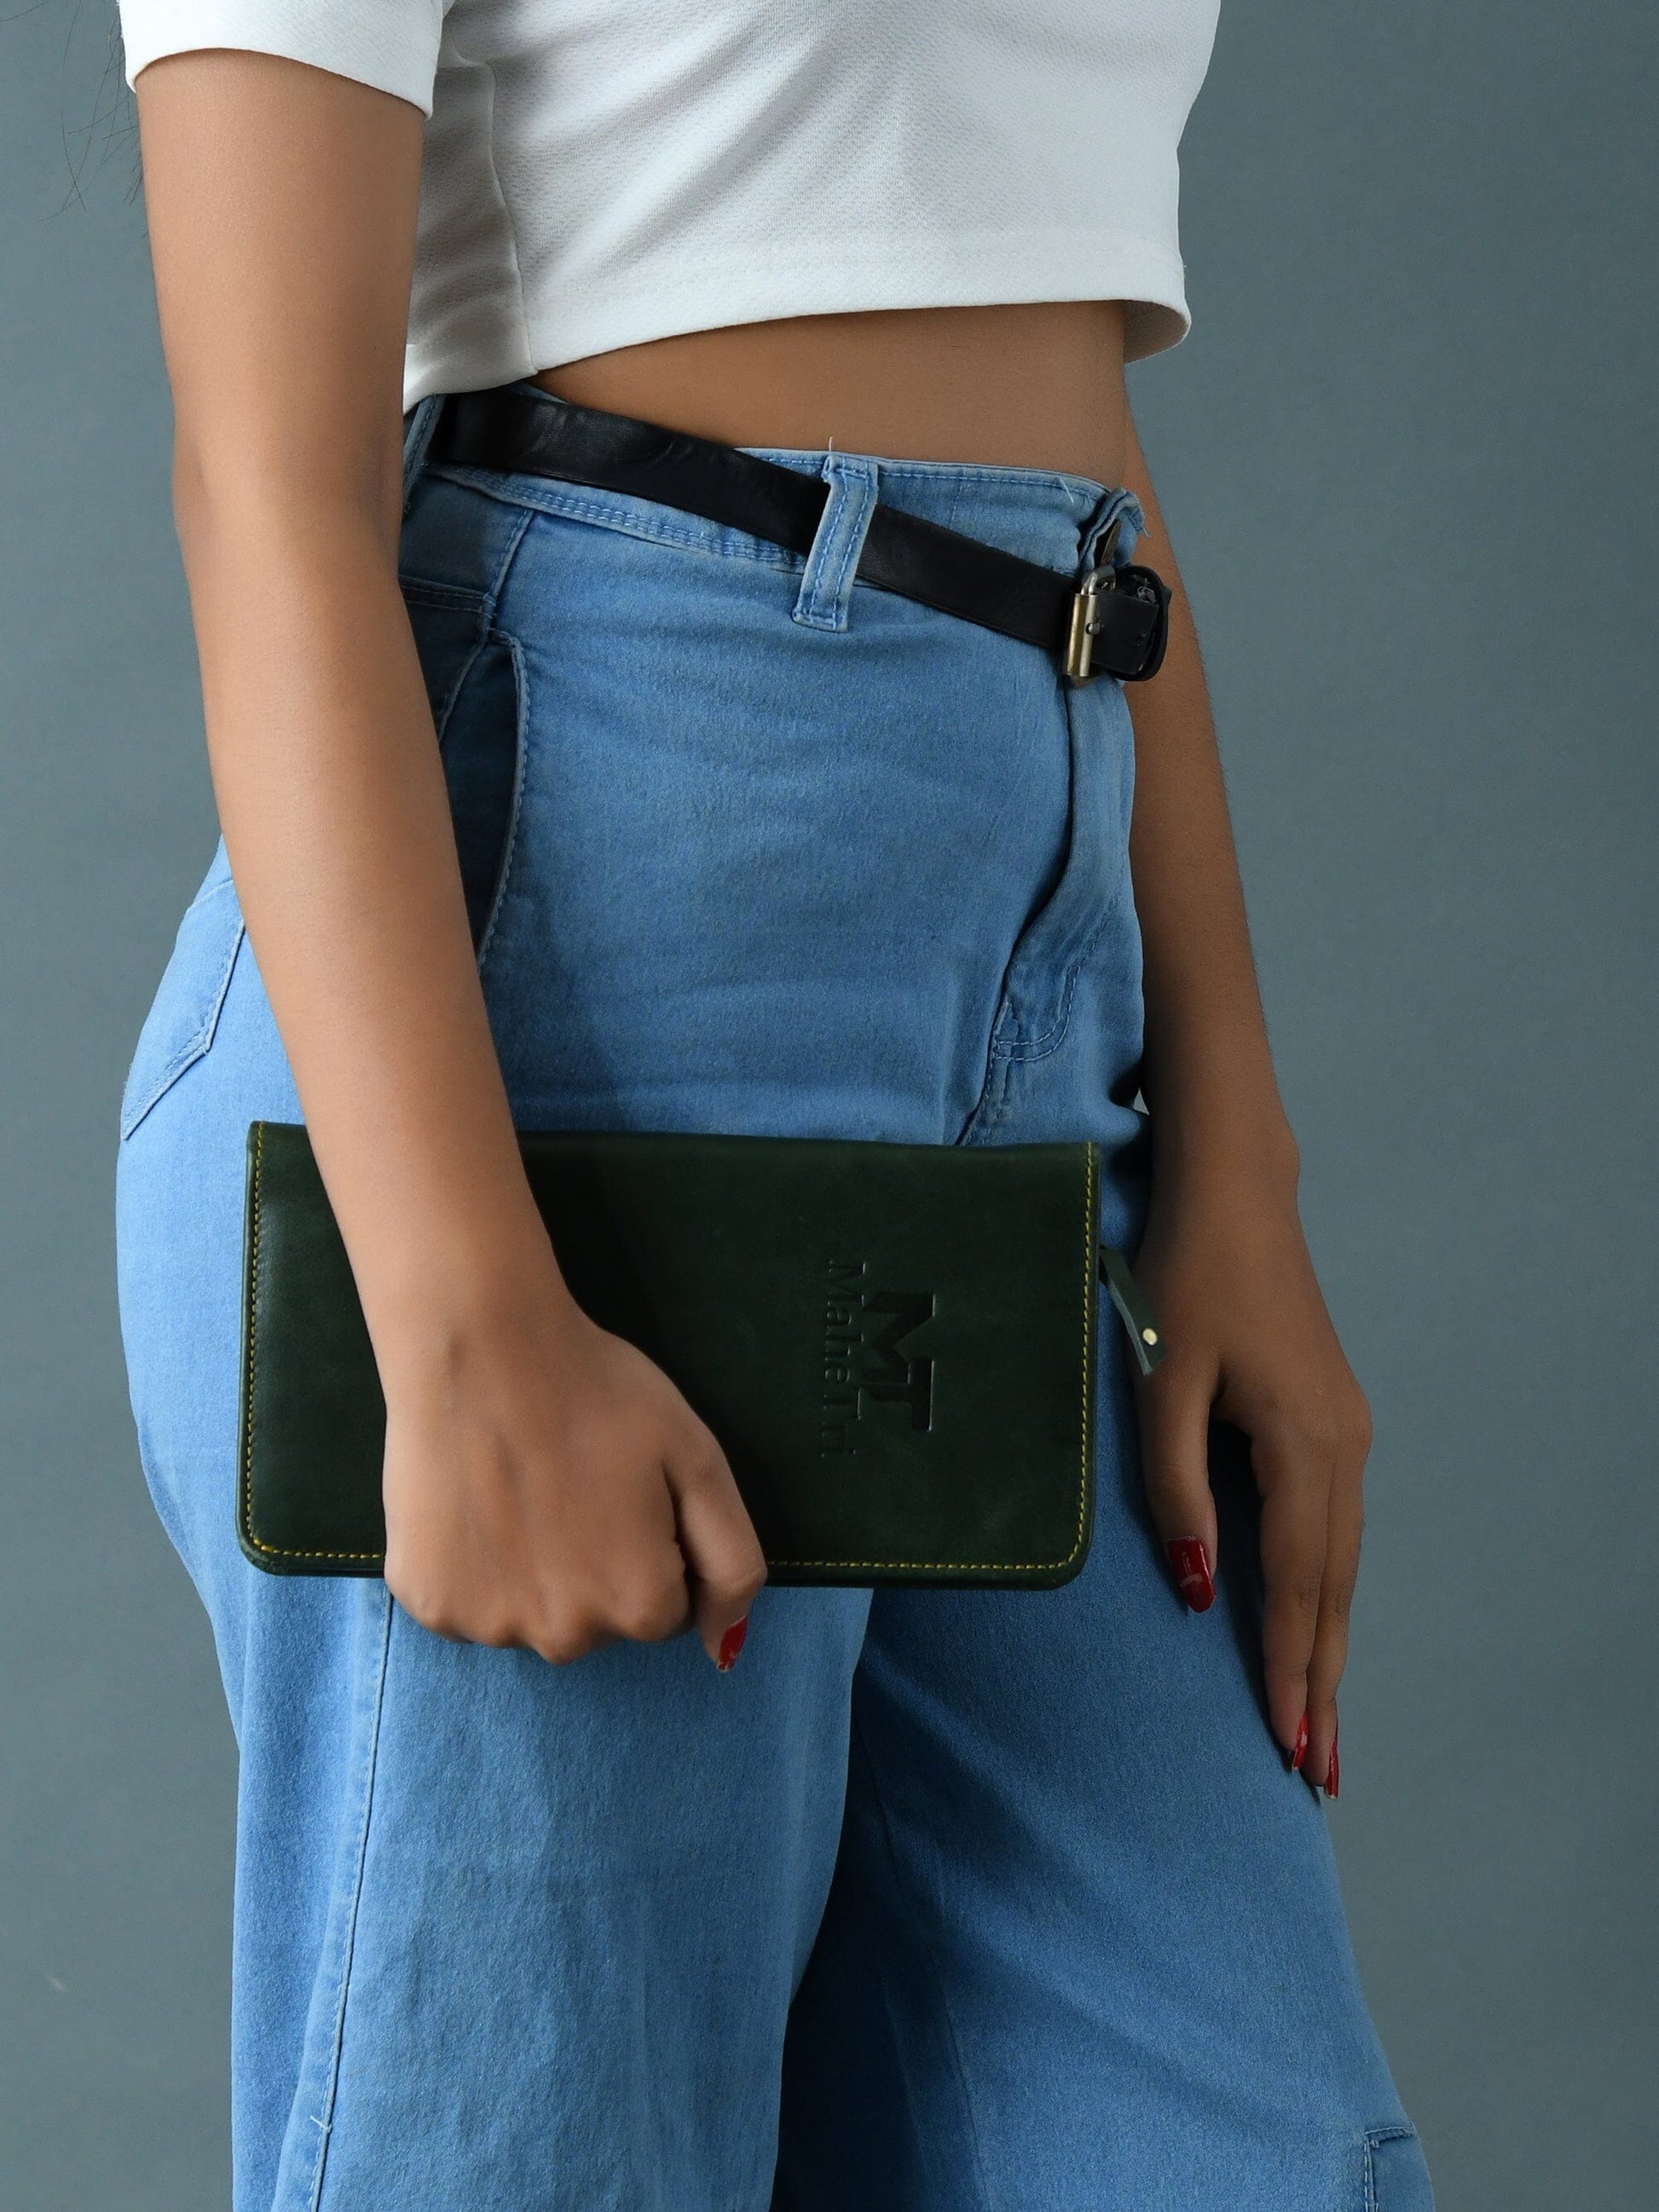 Blair Women's Wallet- Olive Green - The Tool Store